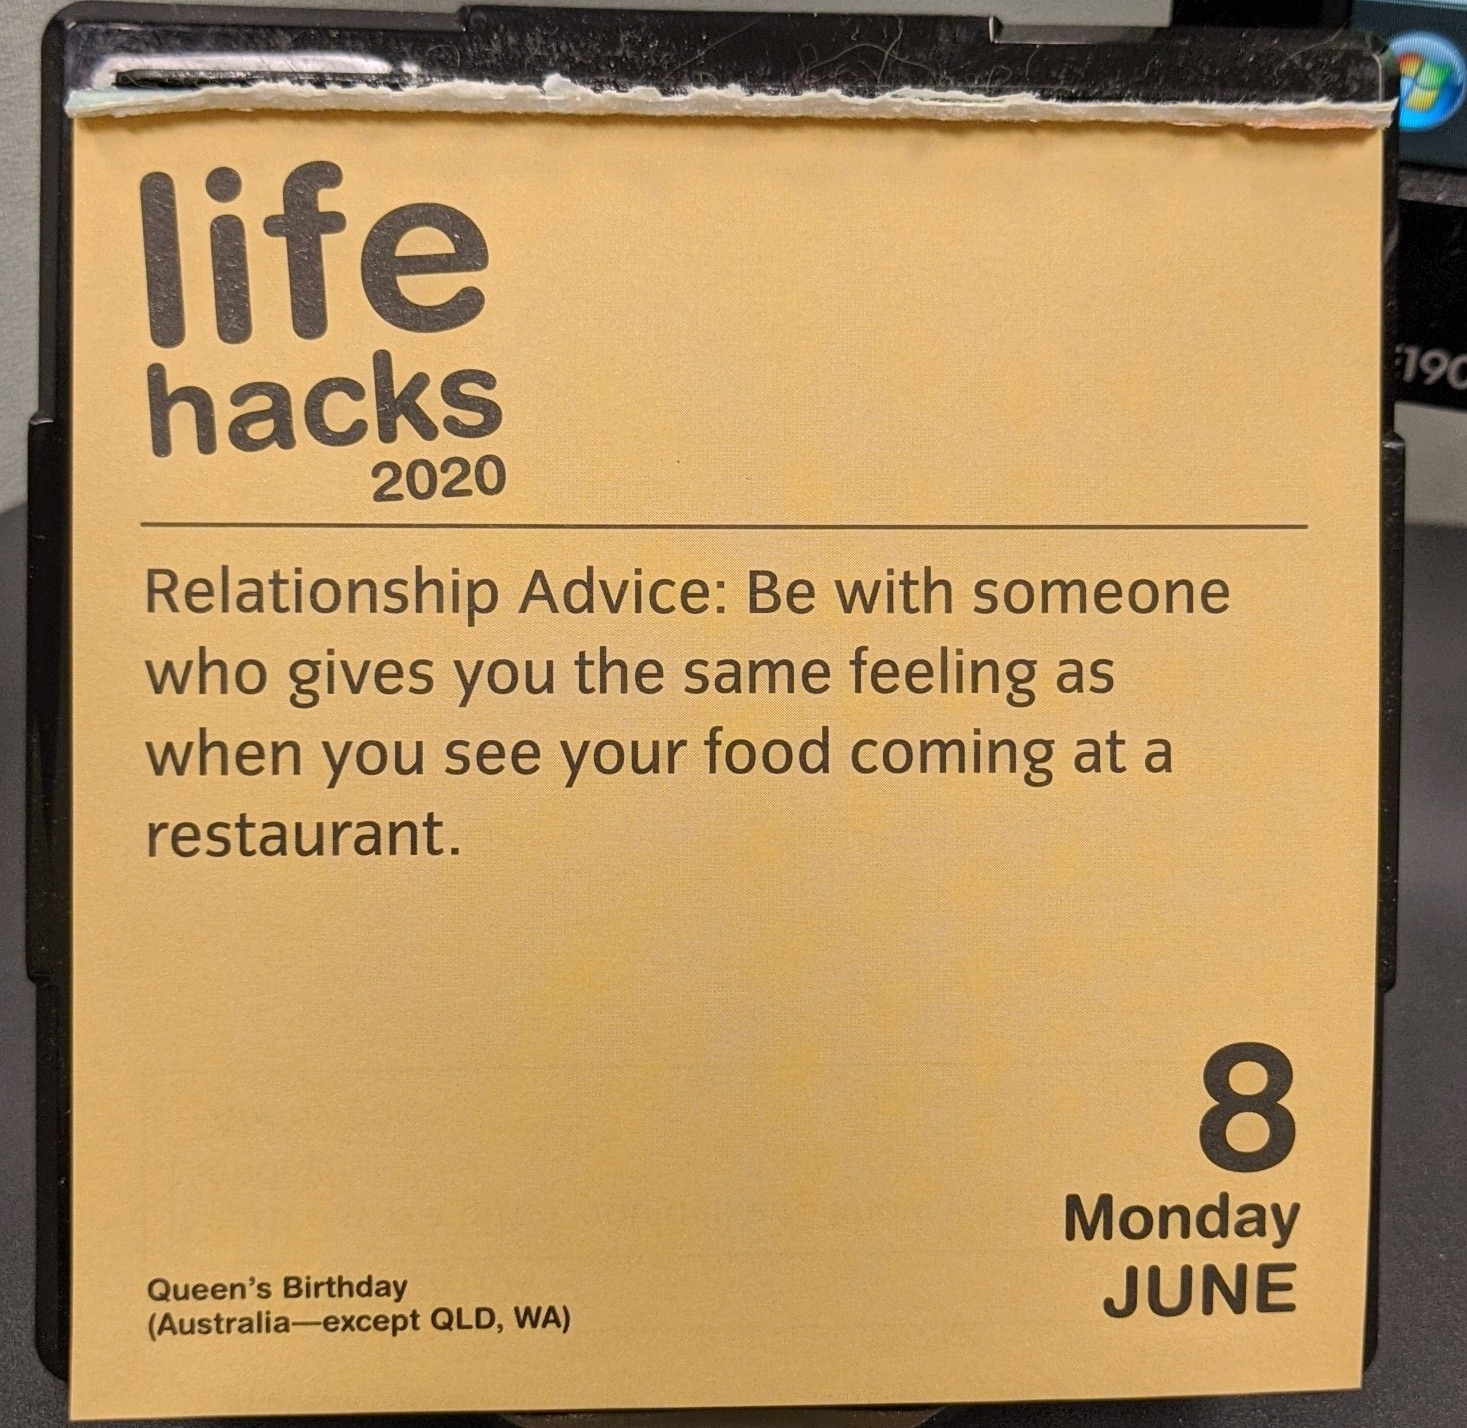 Women, Advice feminine memes Women, Advice text: hacks 2020 Relationship Advice: Be with someone who gives you the same feeling as when you see your food coming at a restaurant. Queen's Birthday (Australia—except QLD, WA) Monday JUNE 